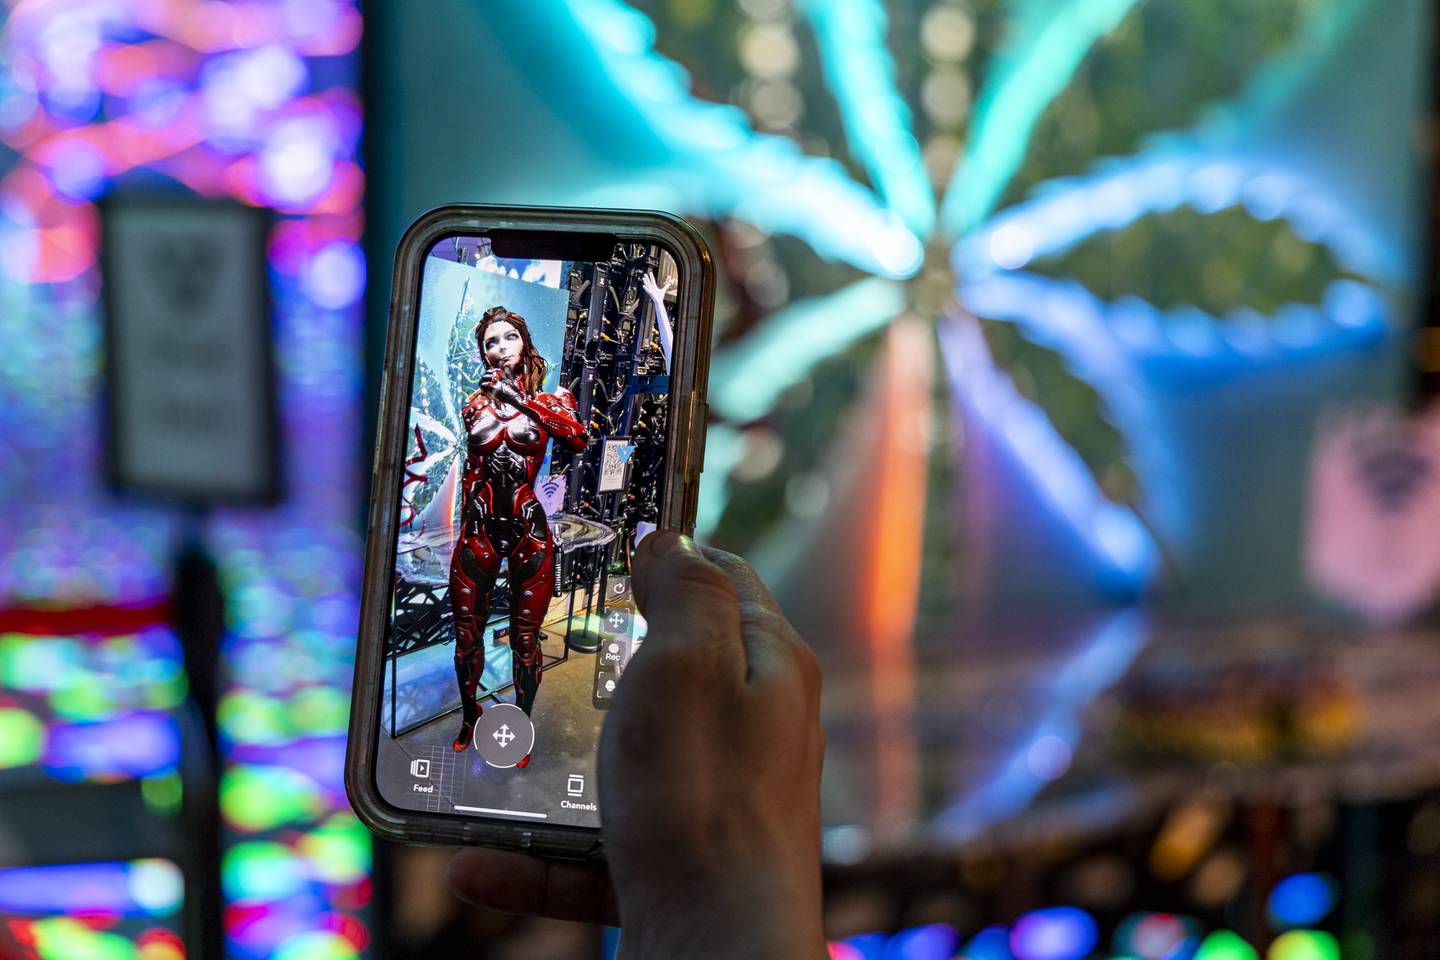 OptiView 360 is an events, art and entertainment space in Longwood with futuristic displays and augmented reality technology on Dec. 6, 2022. 